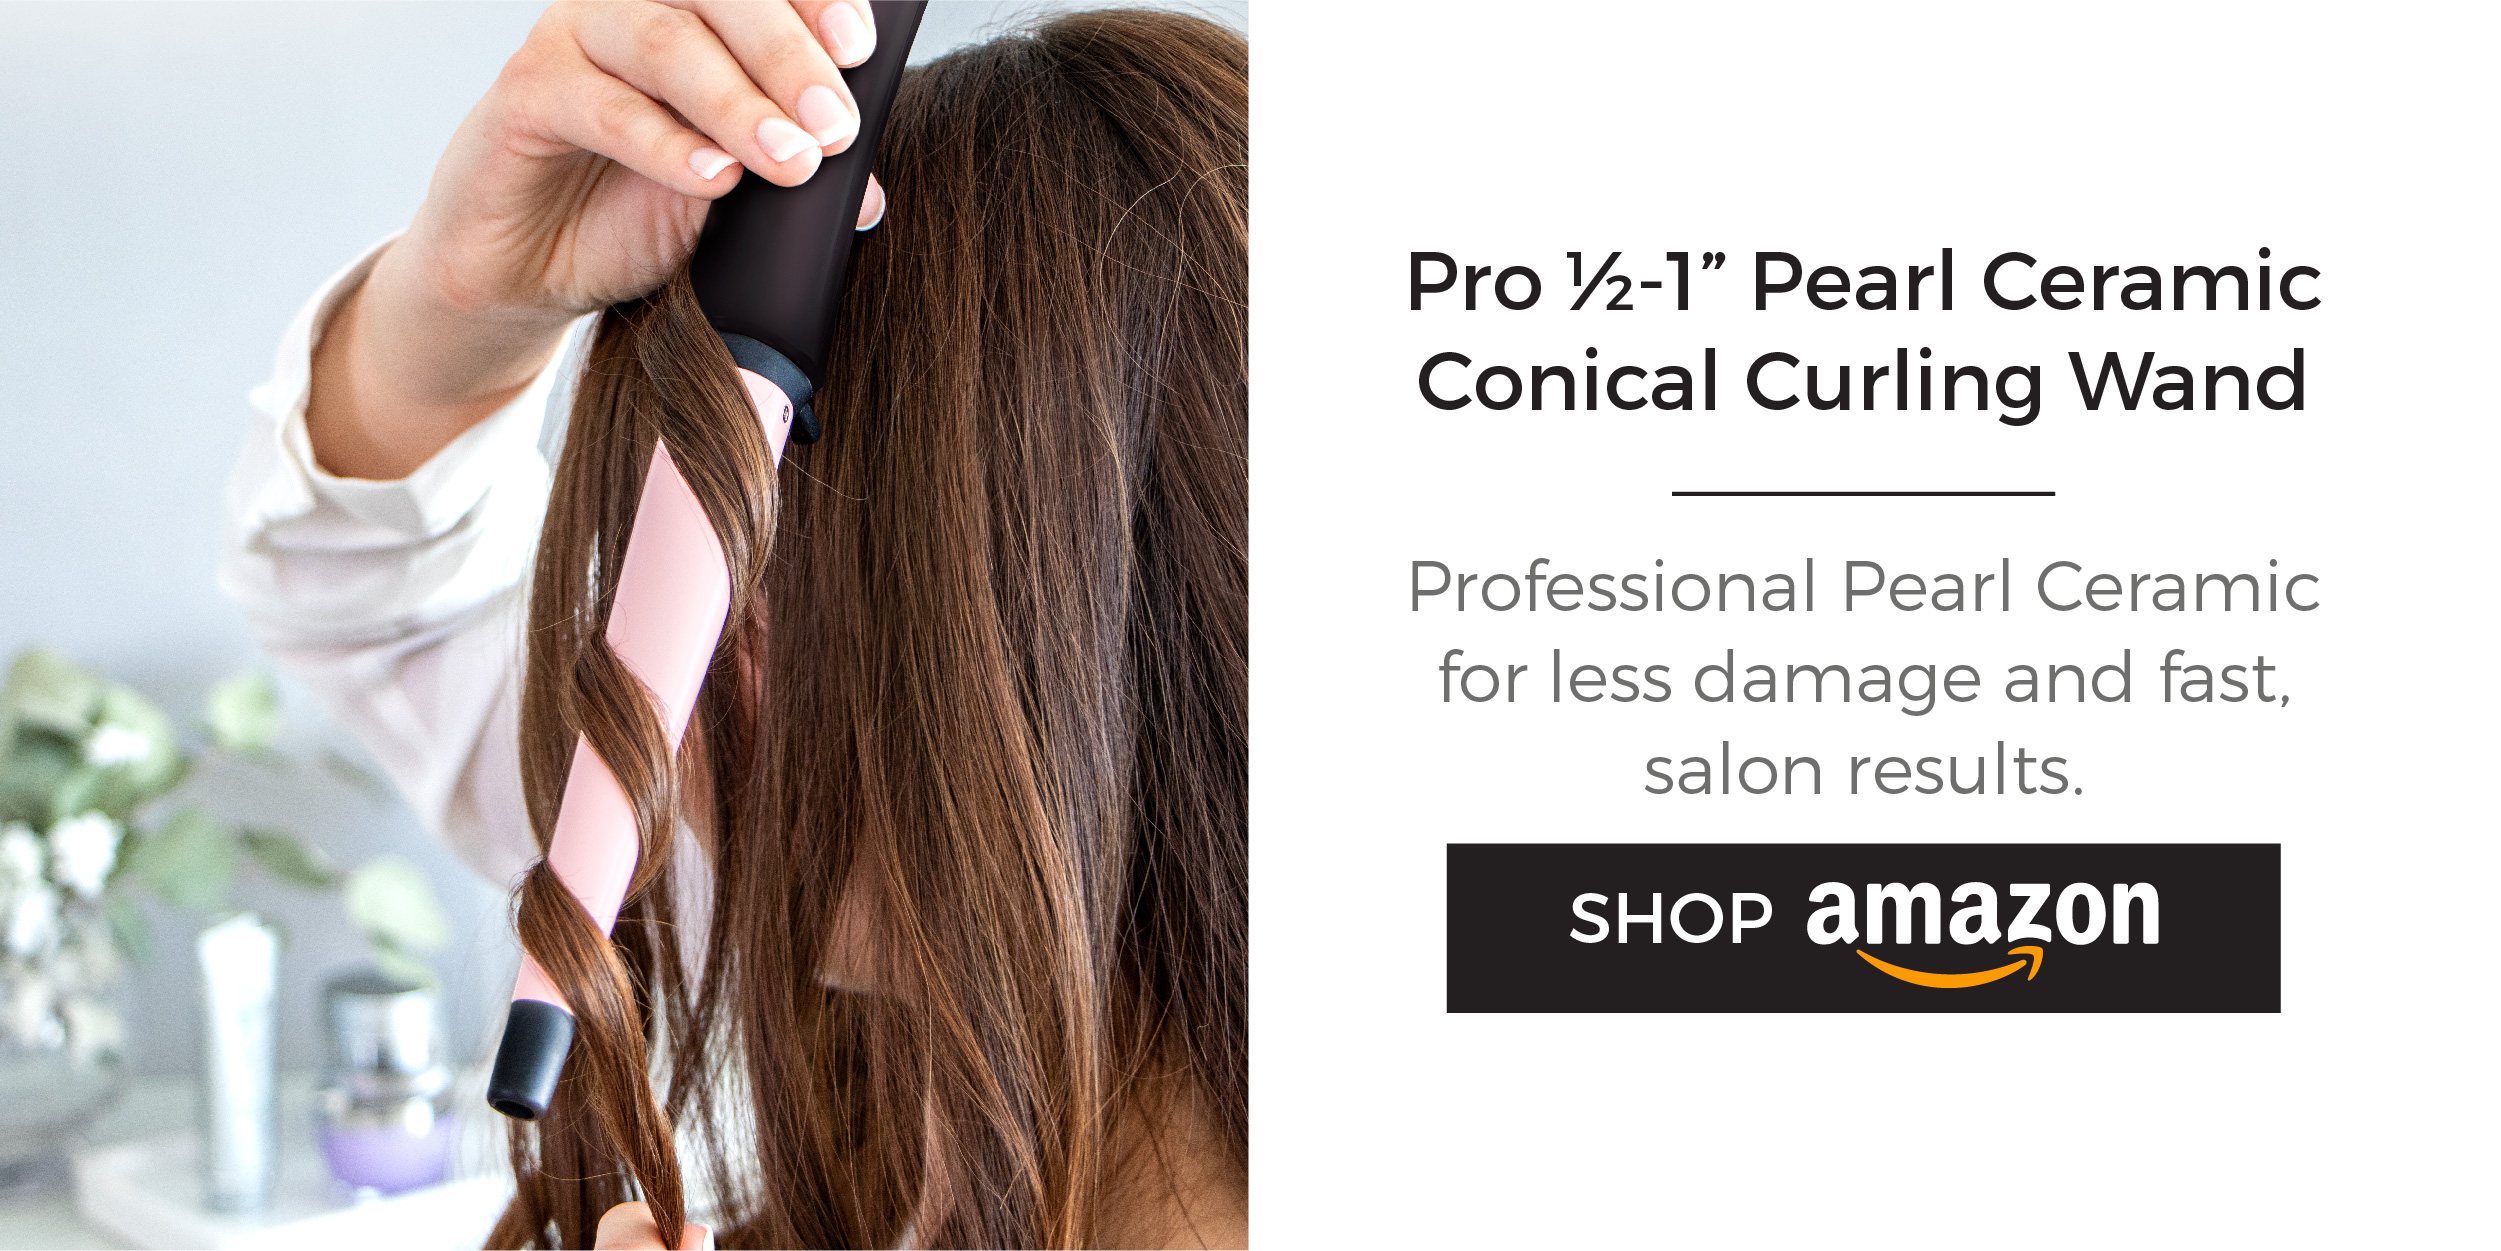 Pro -1 Pearl Ceramic Conical Curling Wand. Shop now!